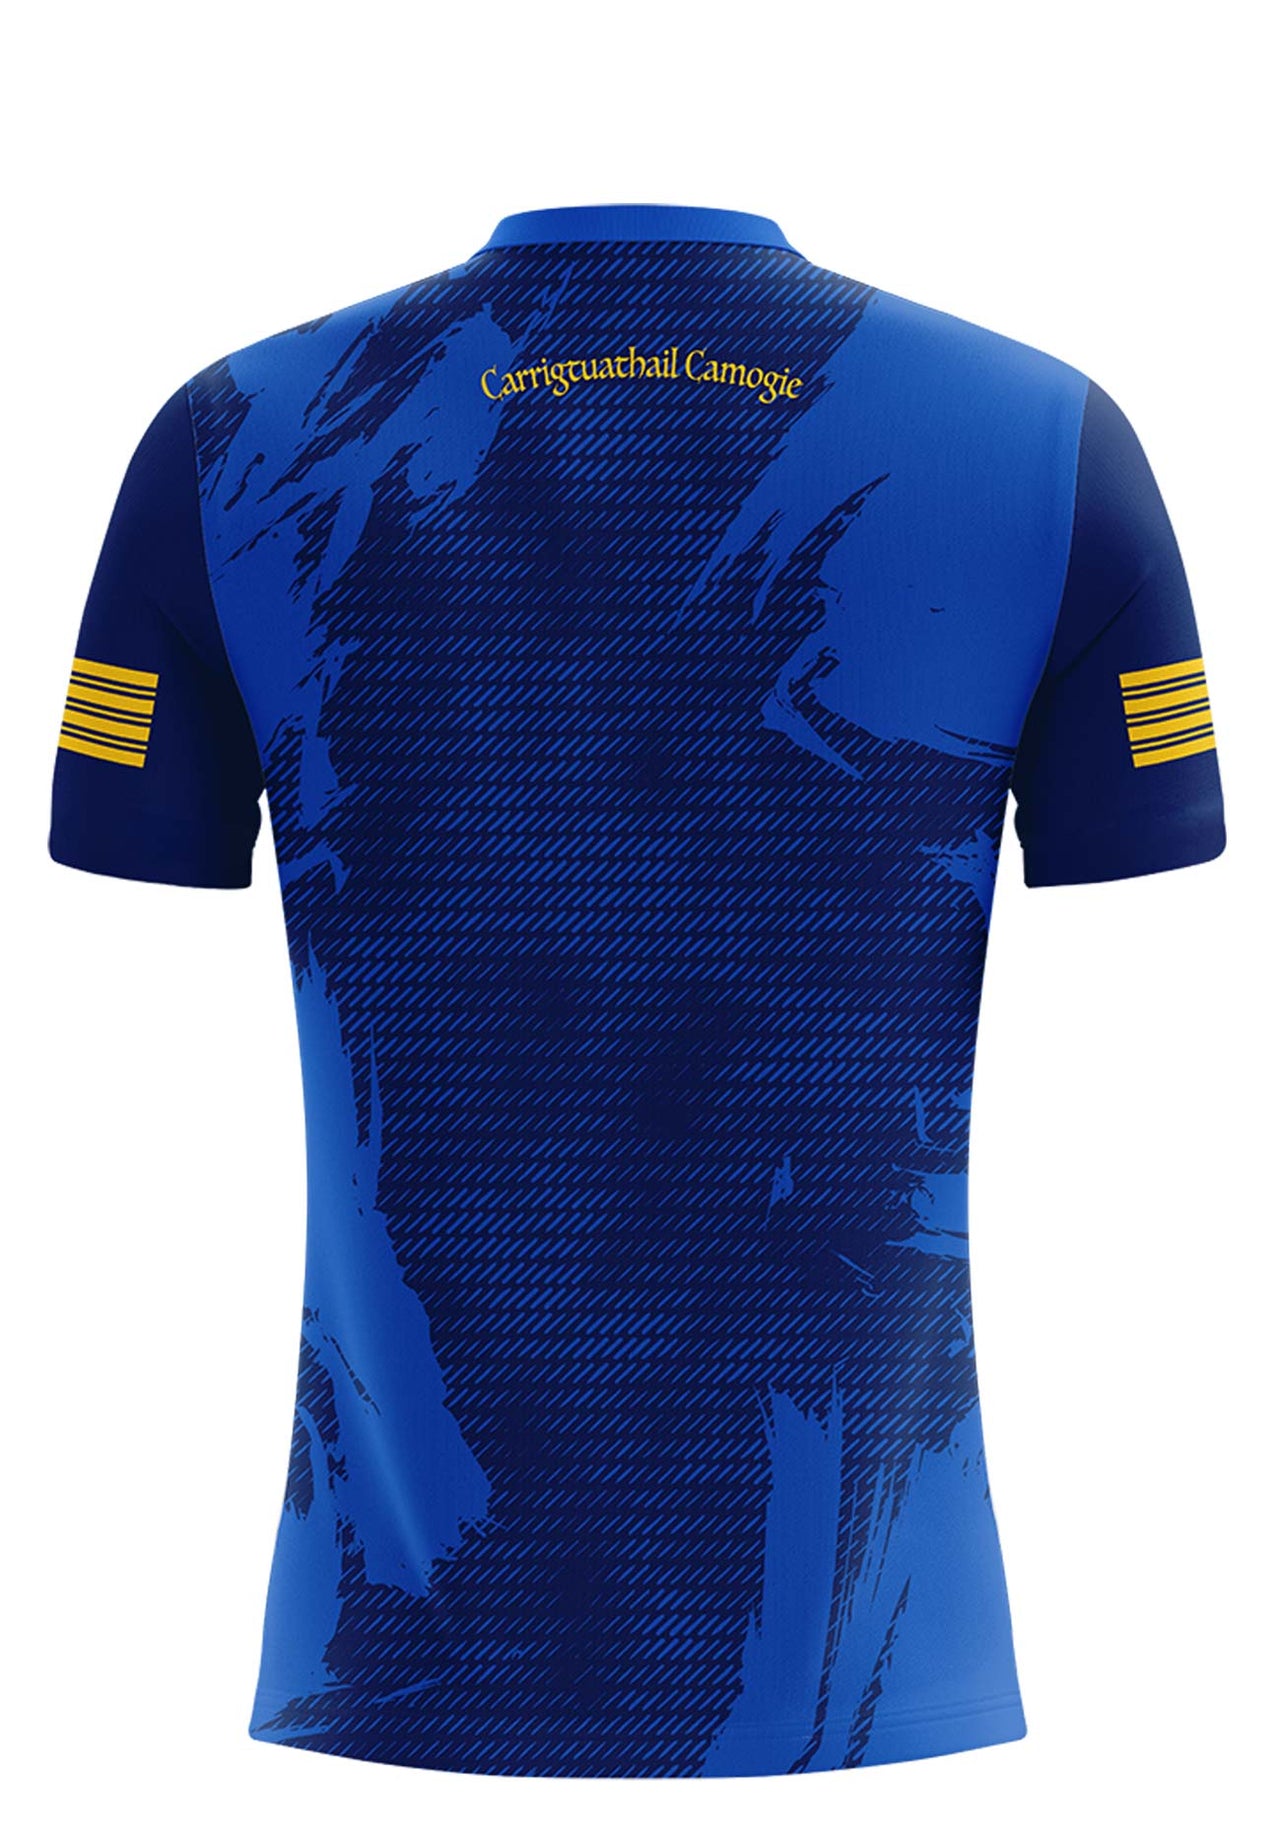 Carrigtwohill Camogie Training Jersey Kids